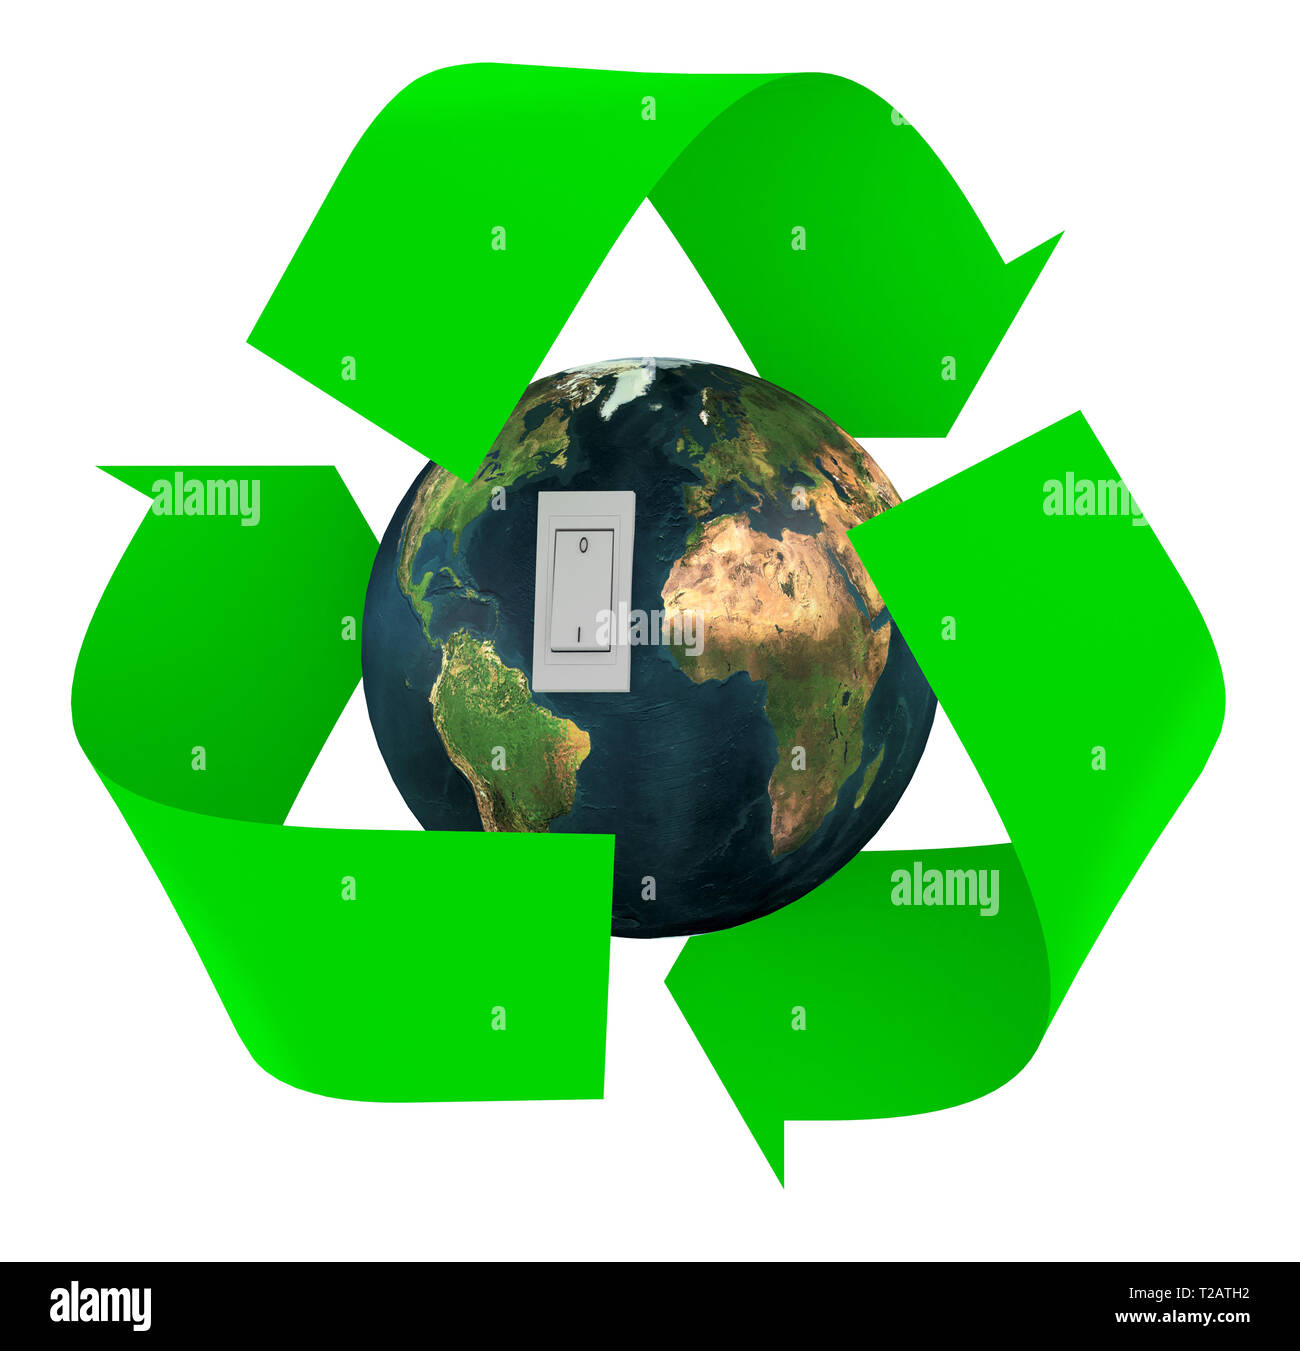 green recycle symbol with earth inside and switch, isolated 3d illustration. Elements of this image furnished by NASA. Stock Photo